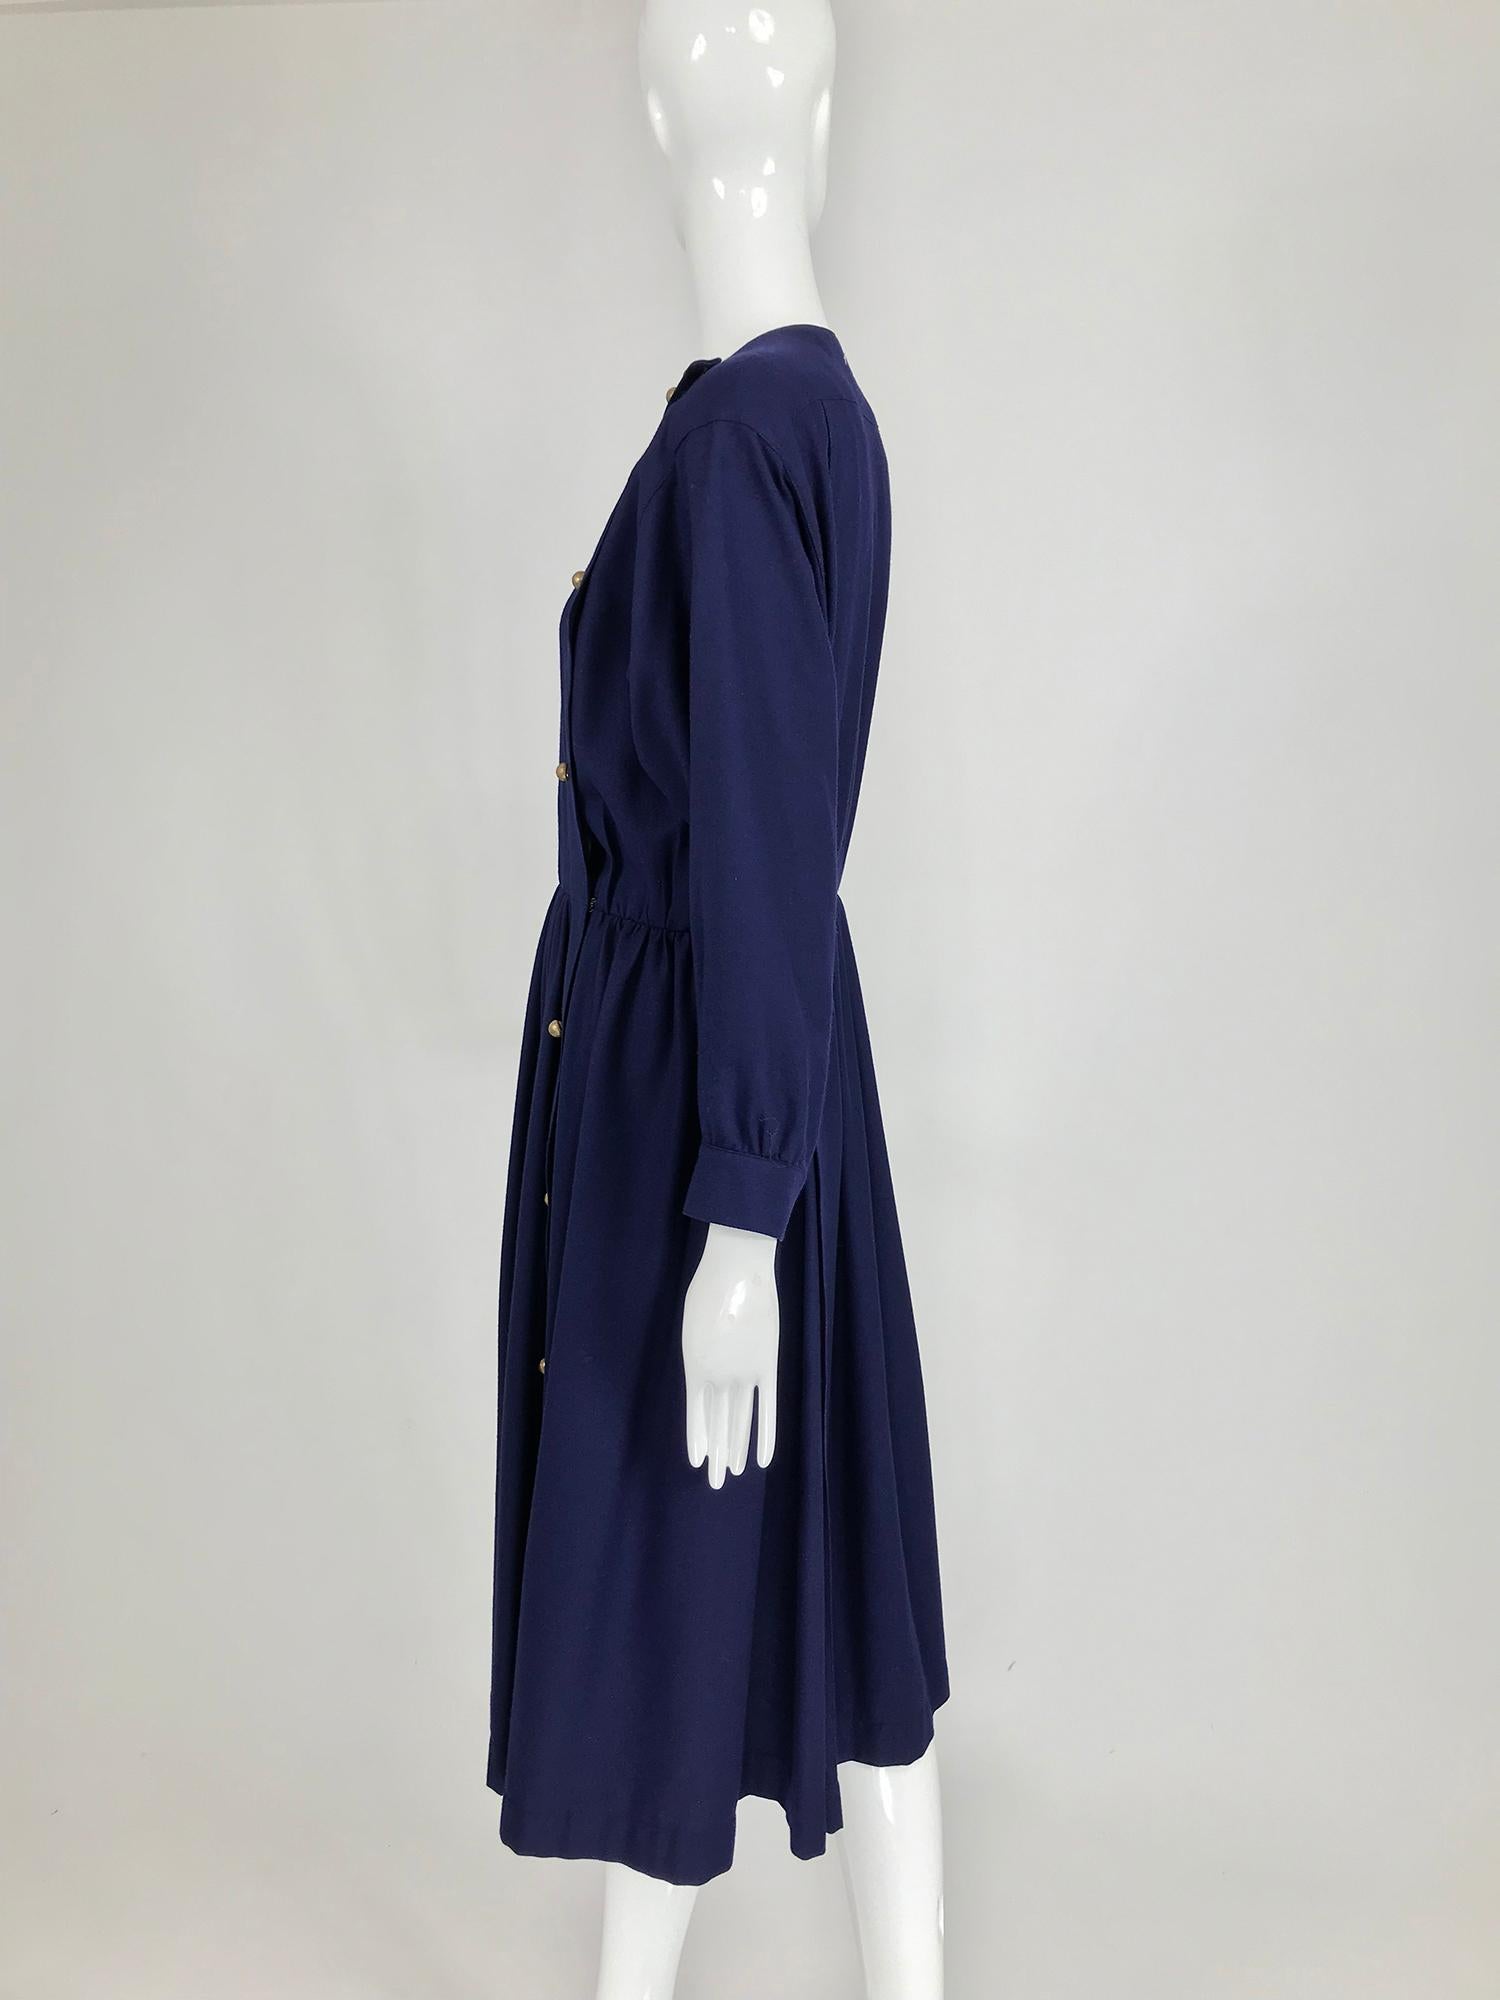 Chloe 1981 Karl Lagerfeld Blue Embroidered Button Front Dress Documented 2